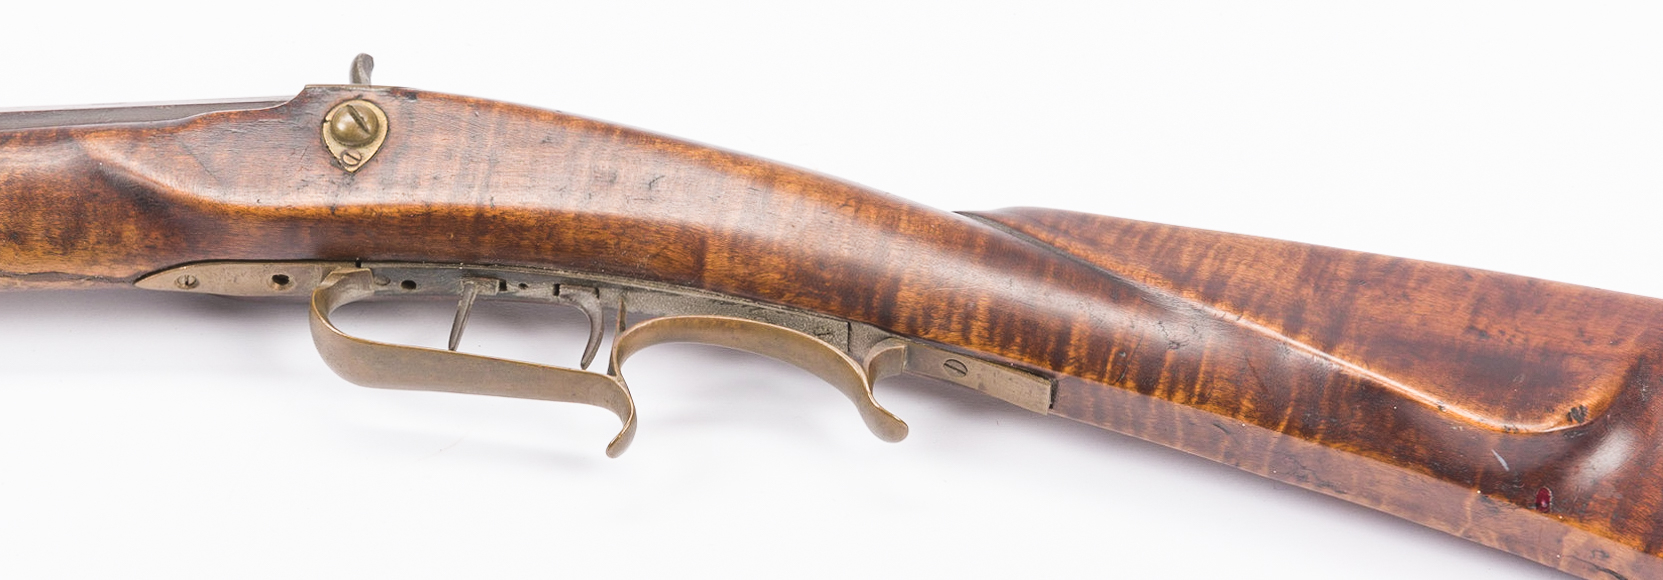 Lot 499: Percussion Half Stock Rifle, .30 Cal., Possibly Southern